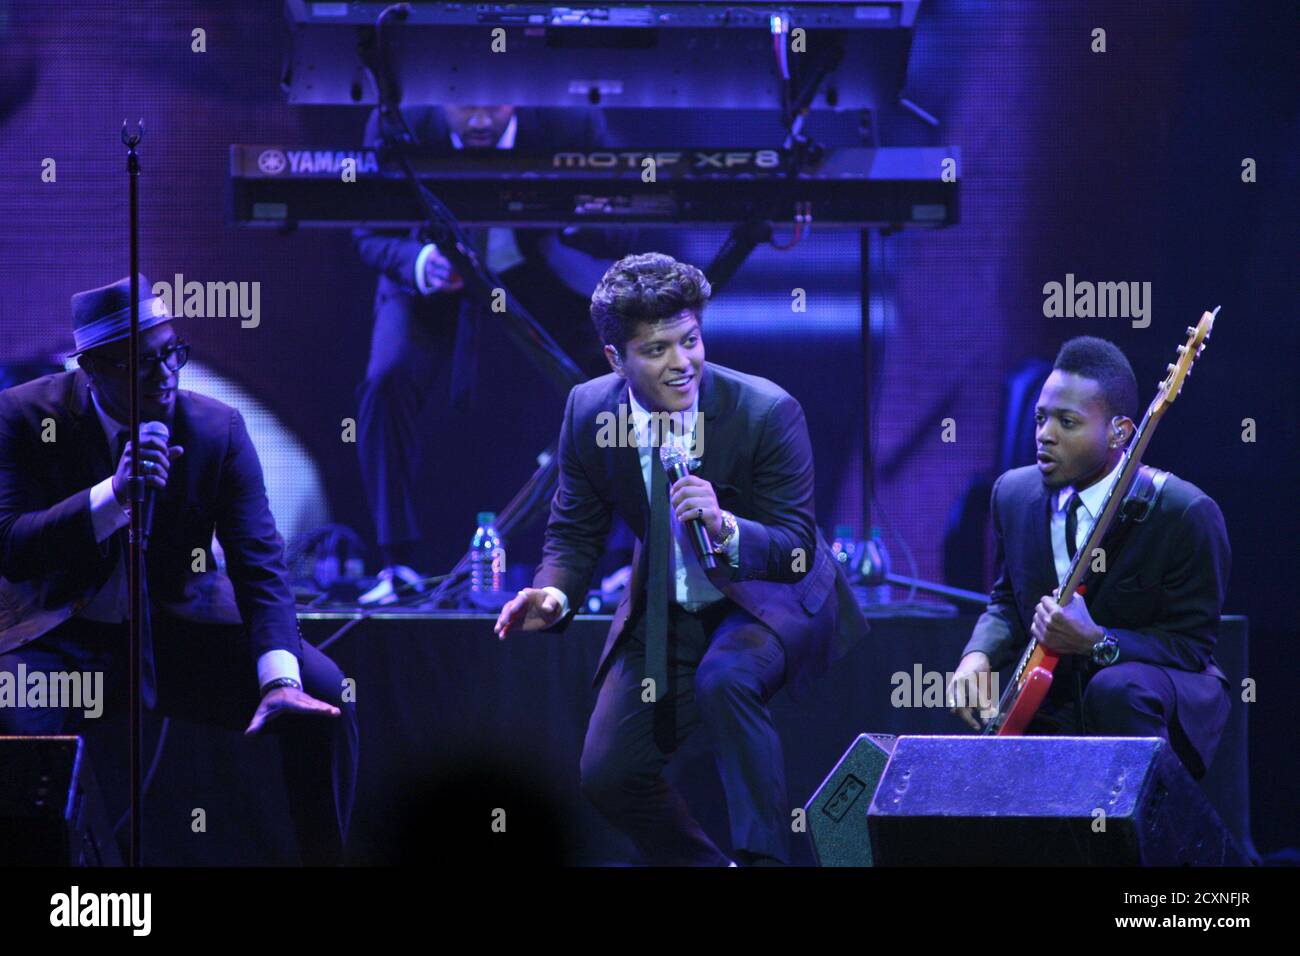 Bruno Mars (C) performs with members of his band during the first day of  the iHeartRadio Music Festival at the MGM Grand Garden Arena in Las Vegas,  Nevada September 23, 2011. The